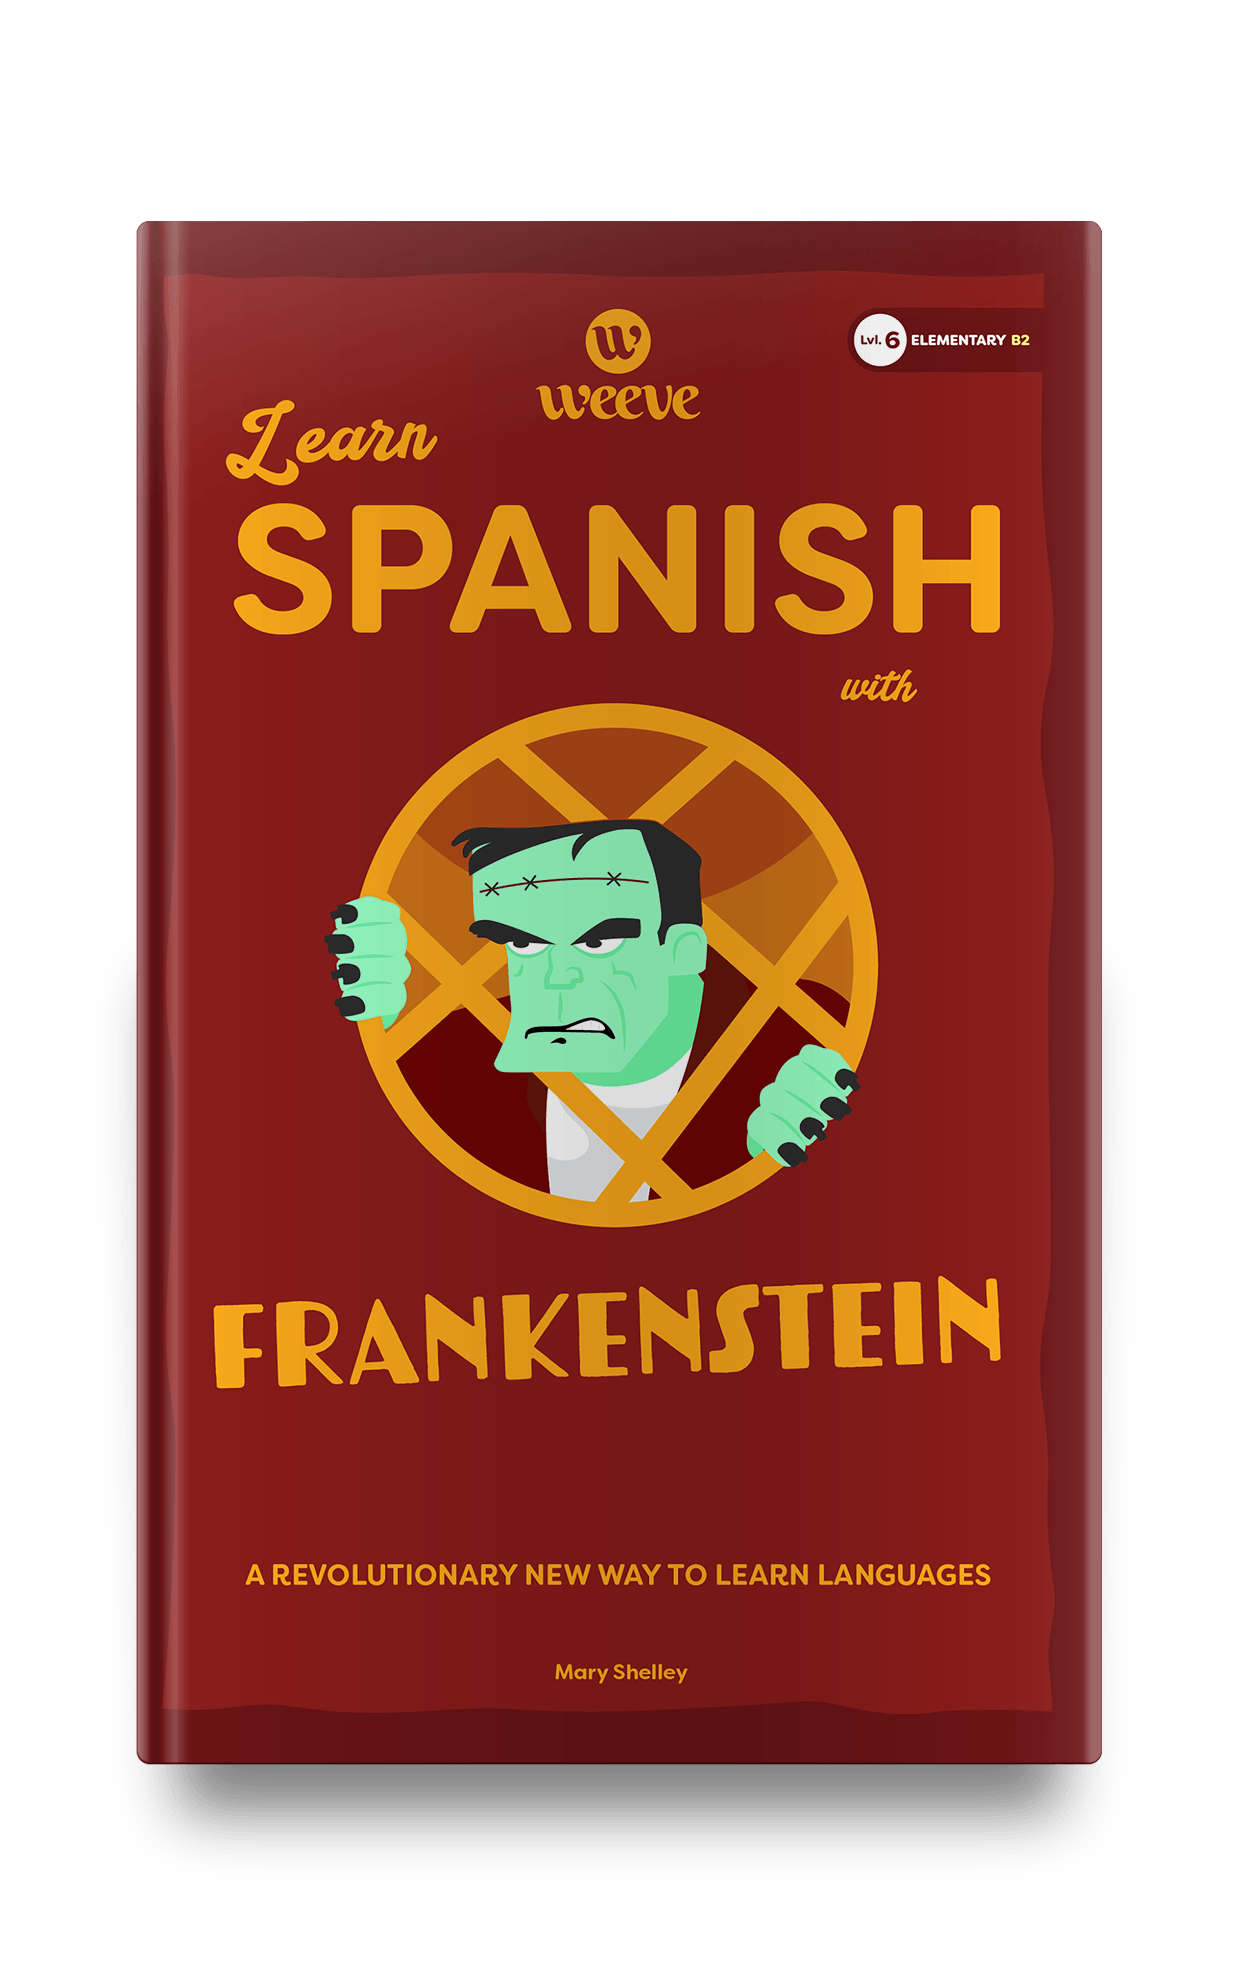 Learn Spanish With Frankenstein - Weeve